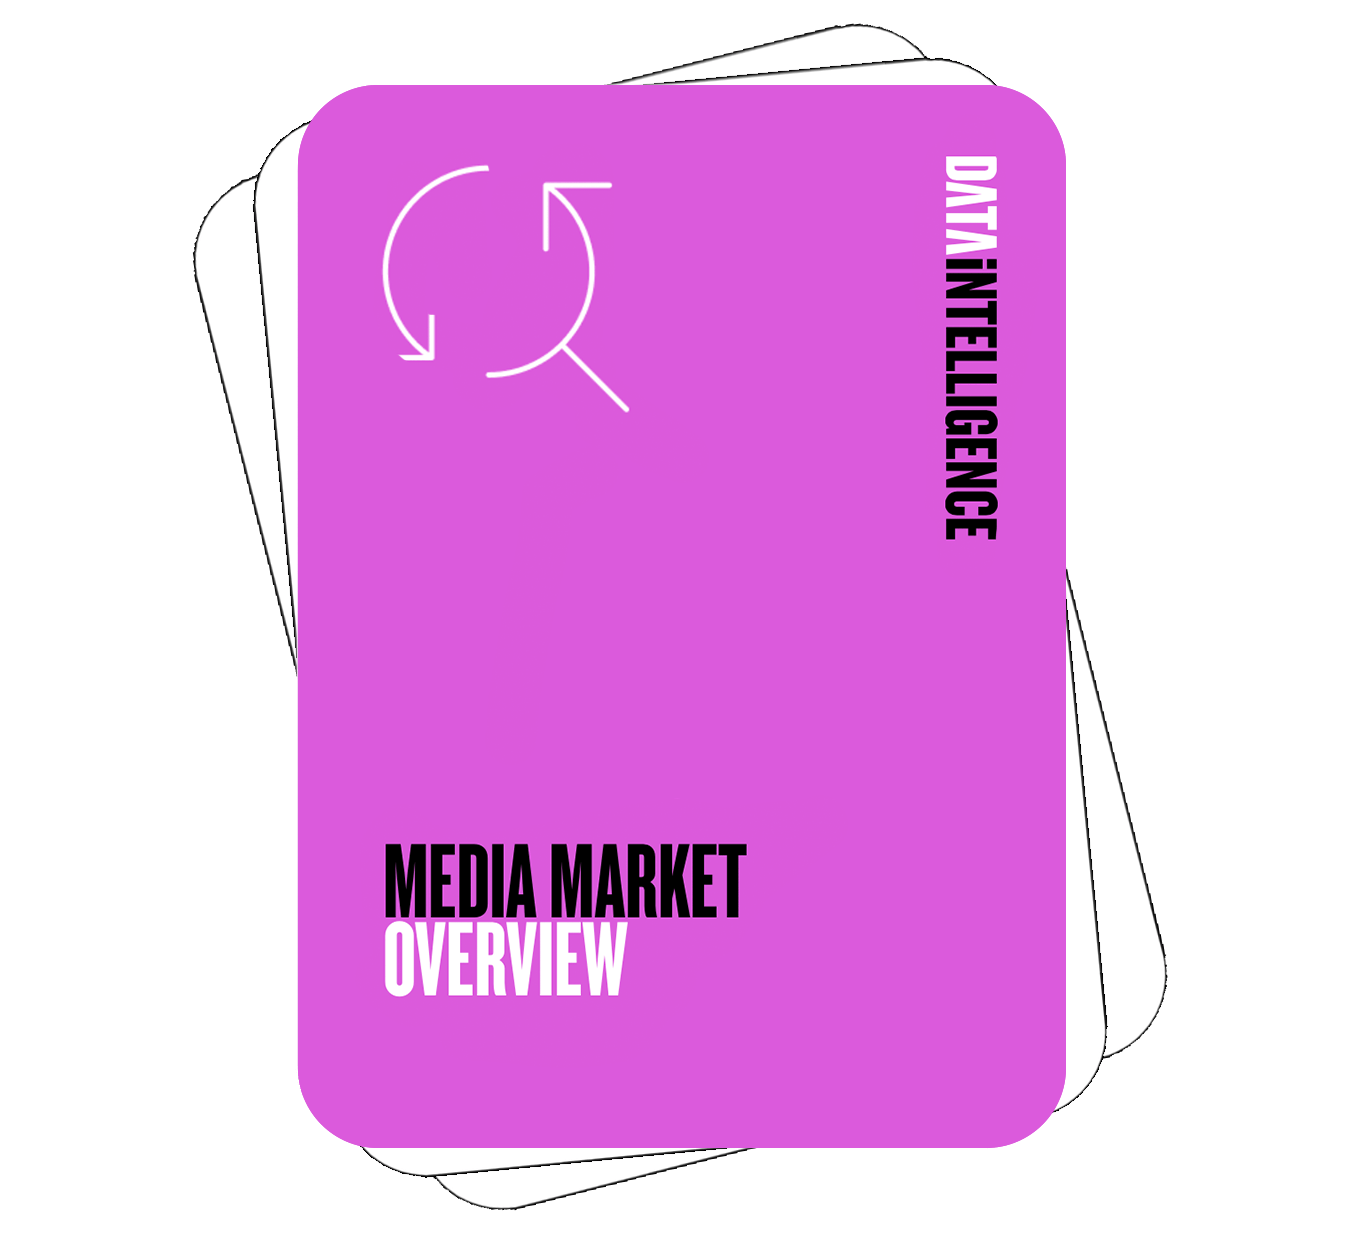 Media Market Overview has been updated and includes the complete data for the year 2023